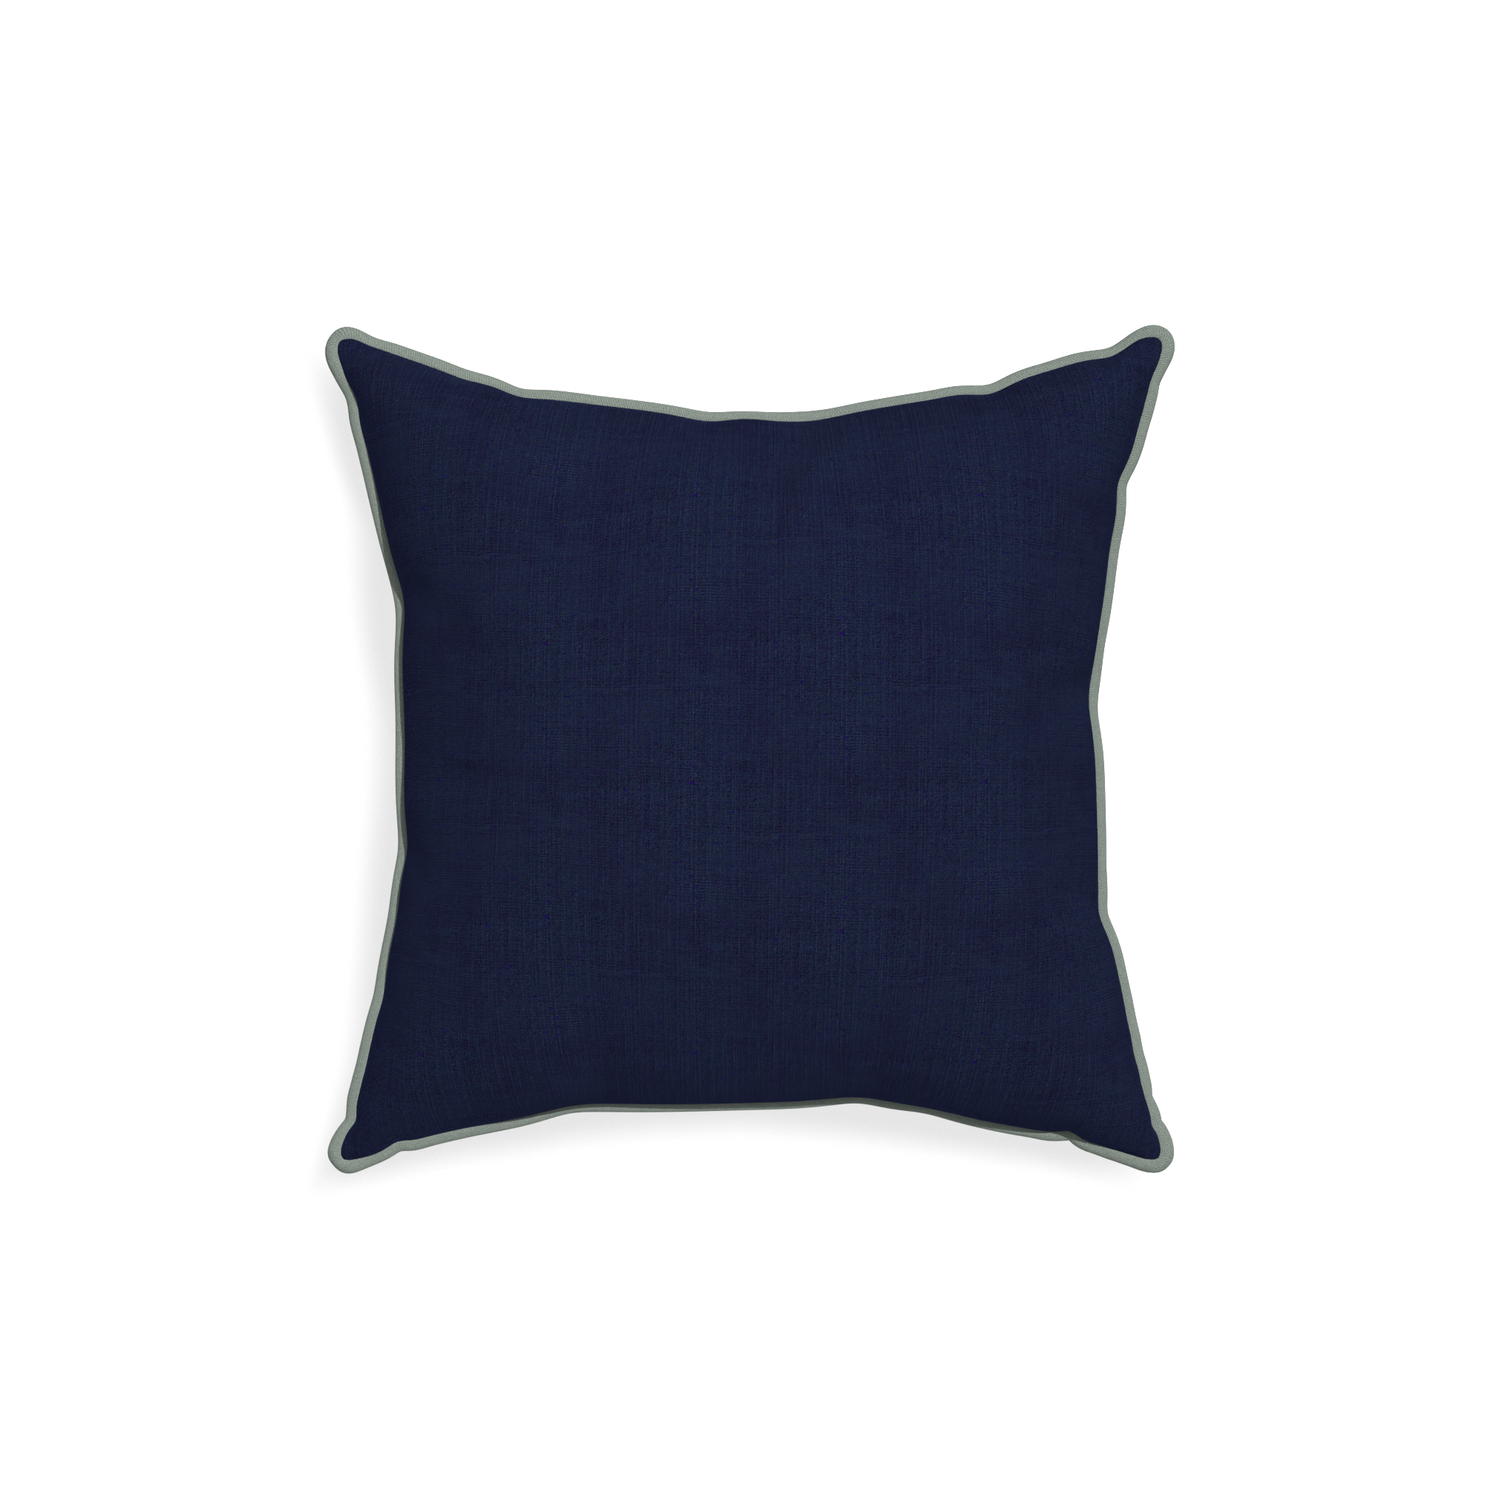 18-square midnight custom navy bluepillow with sage piping on white background